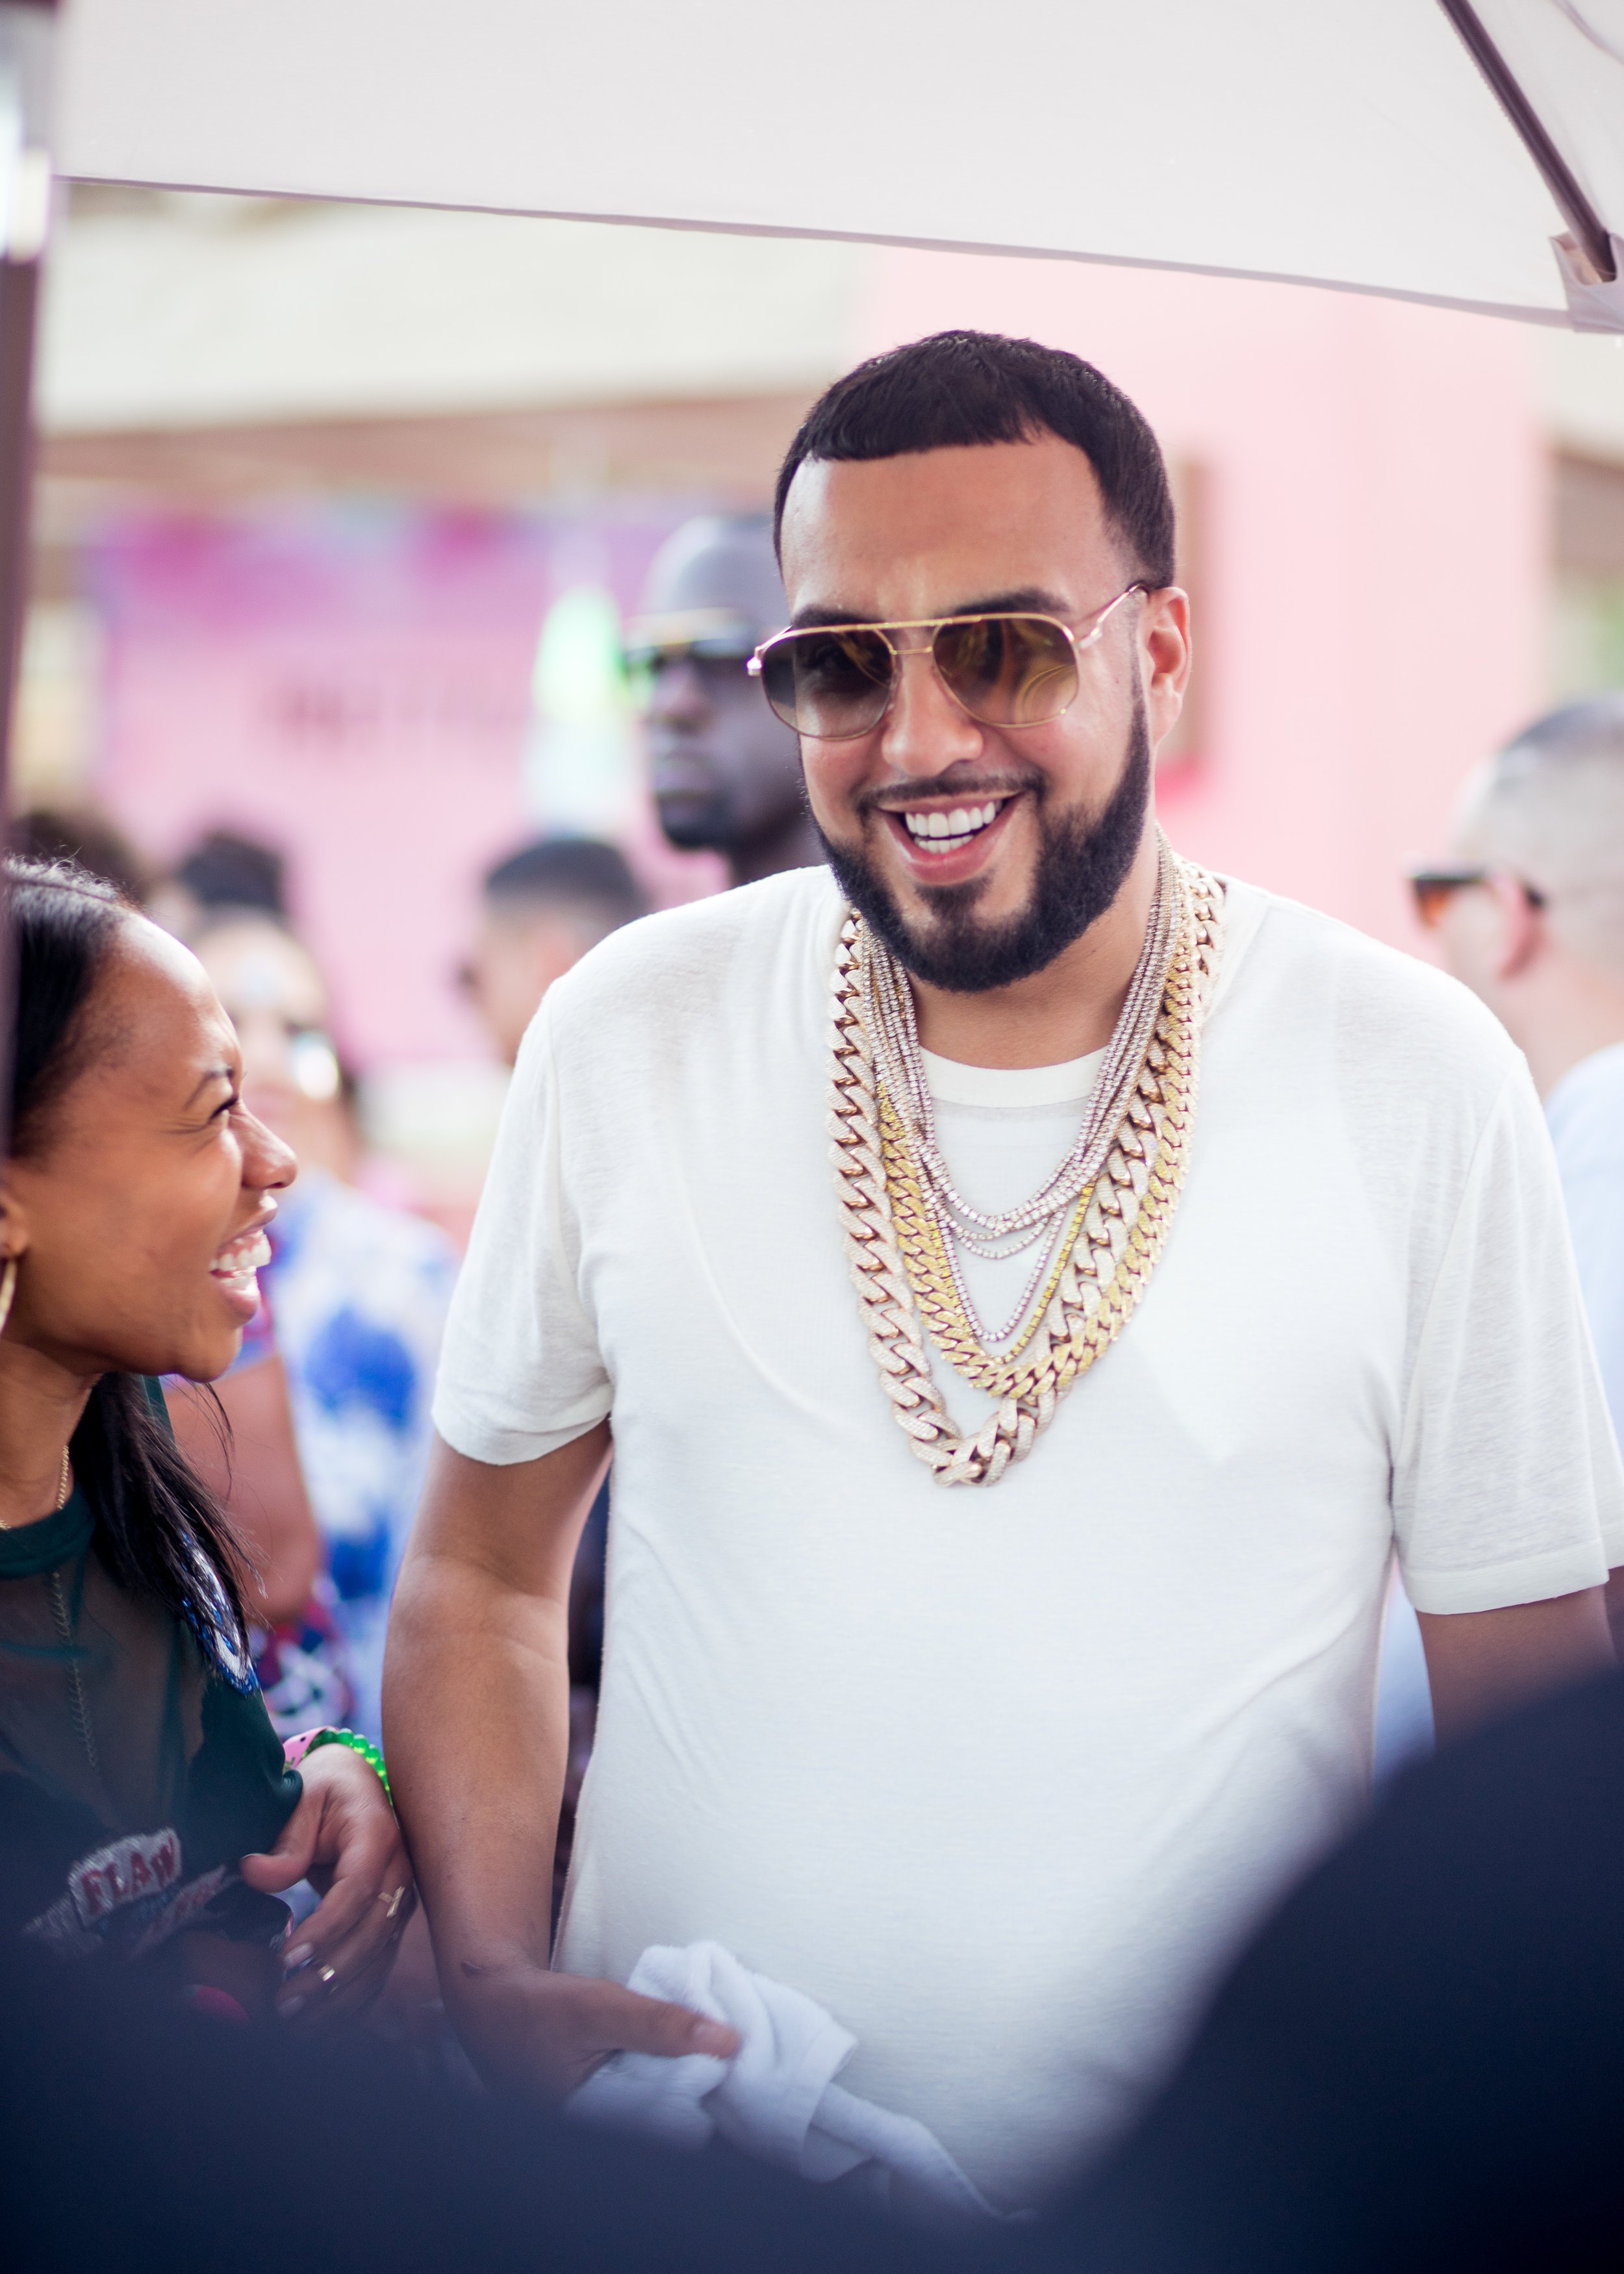 Ultimate Hollywood Coachella Poolside Party french montana having fun.jpg